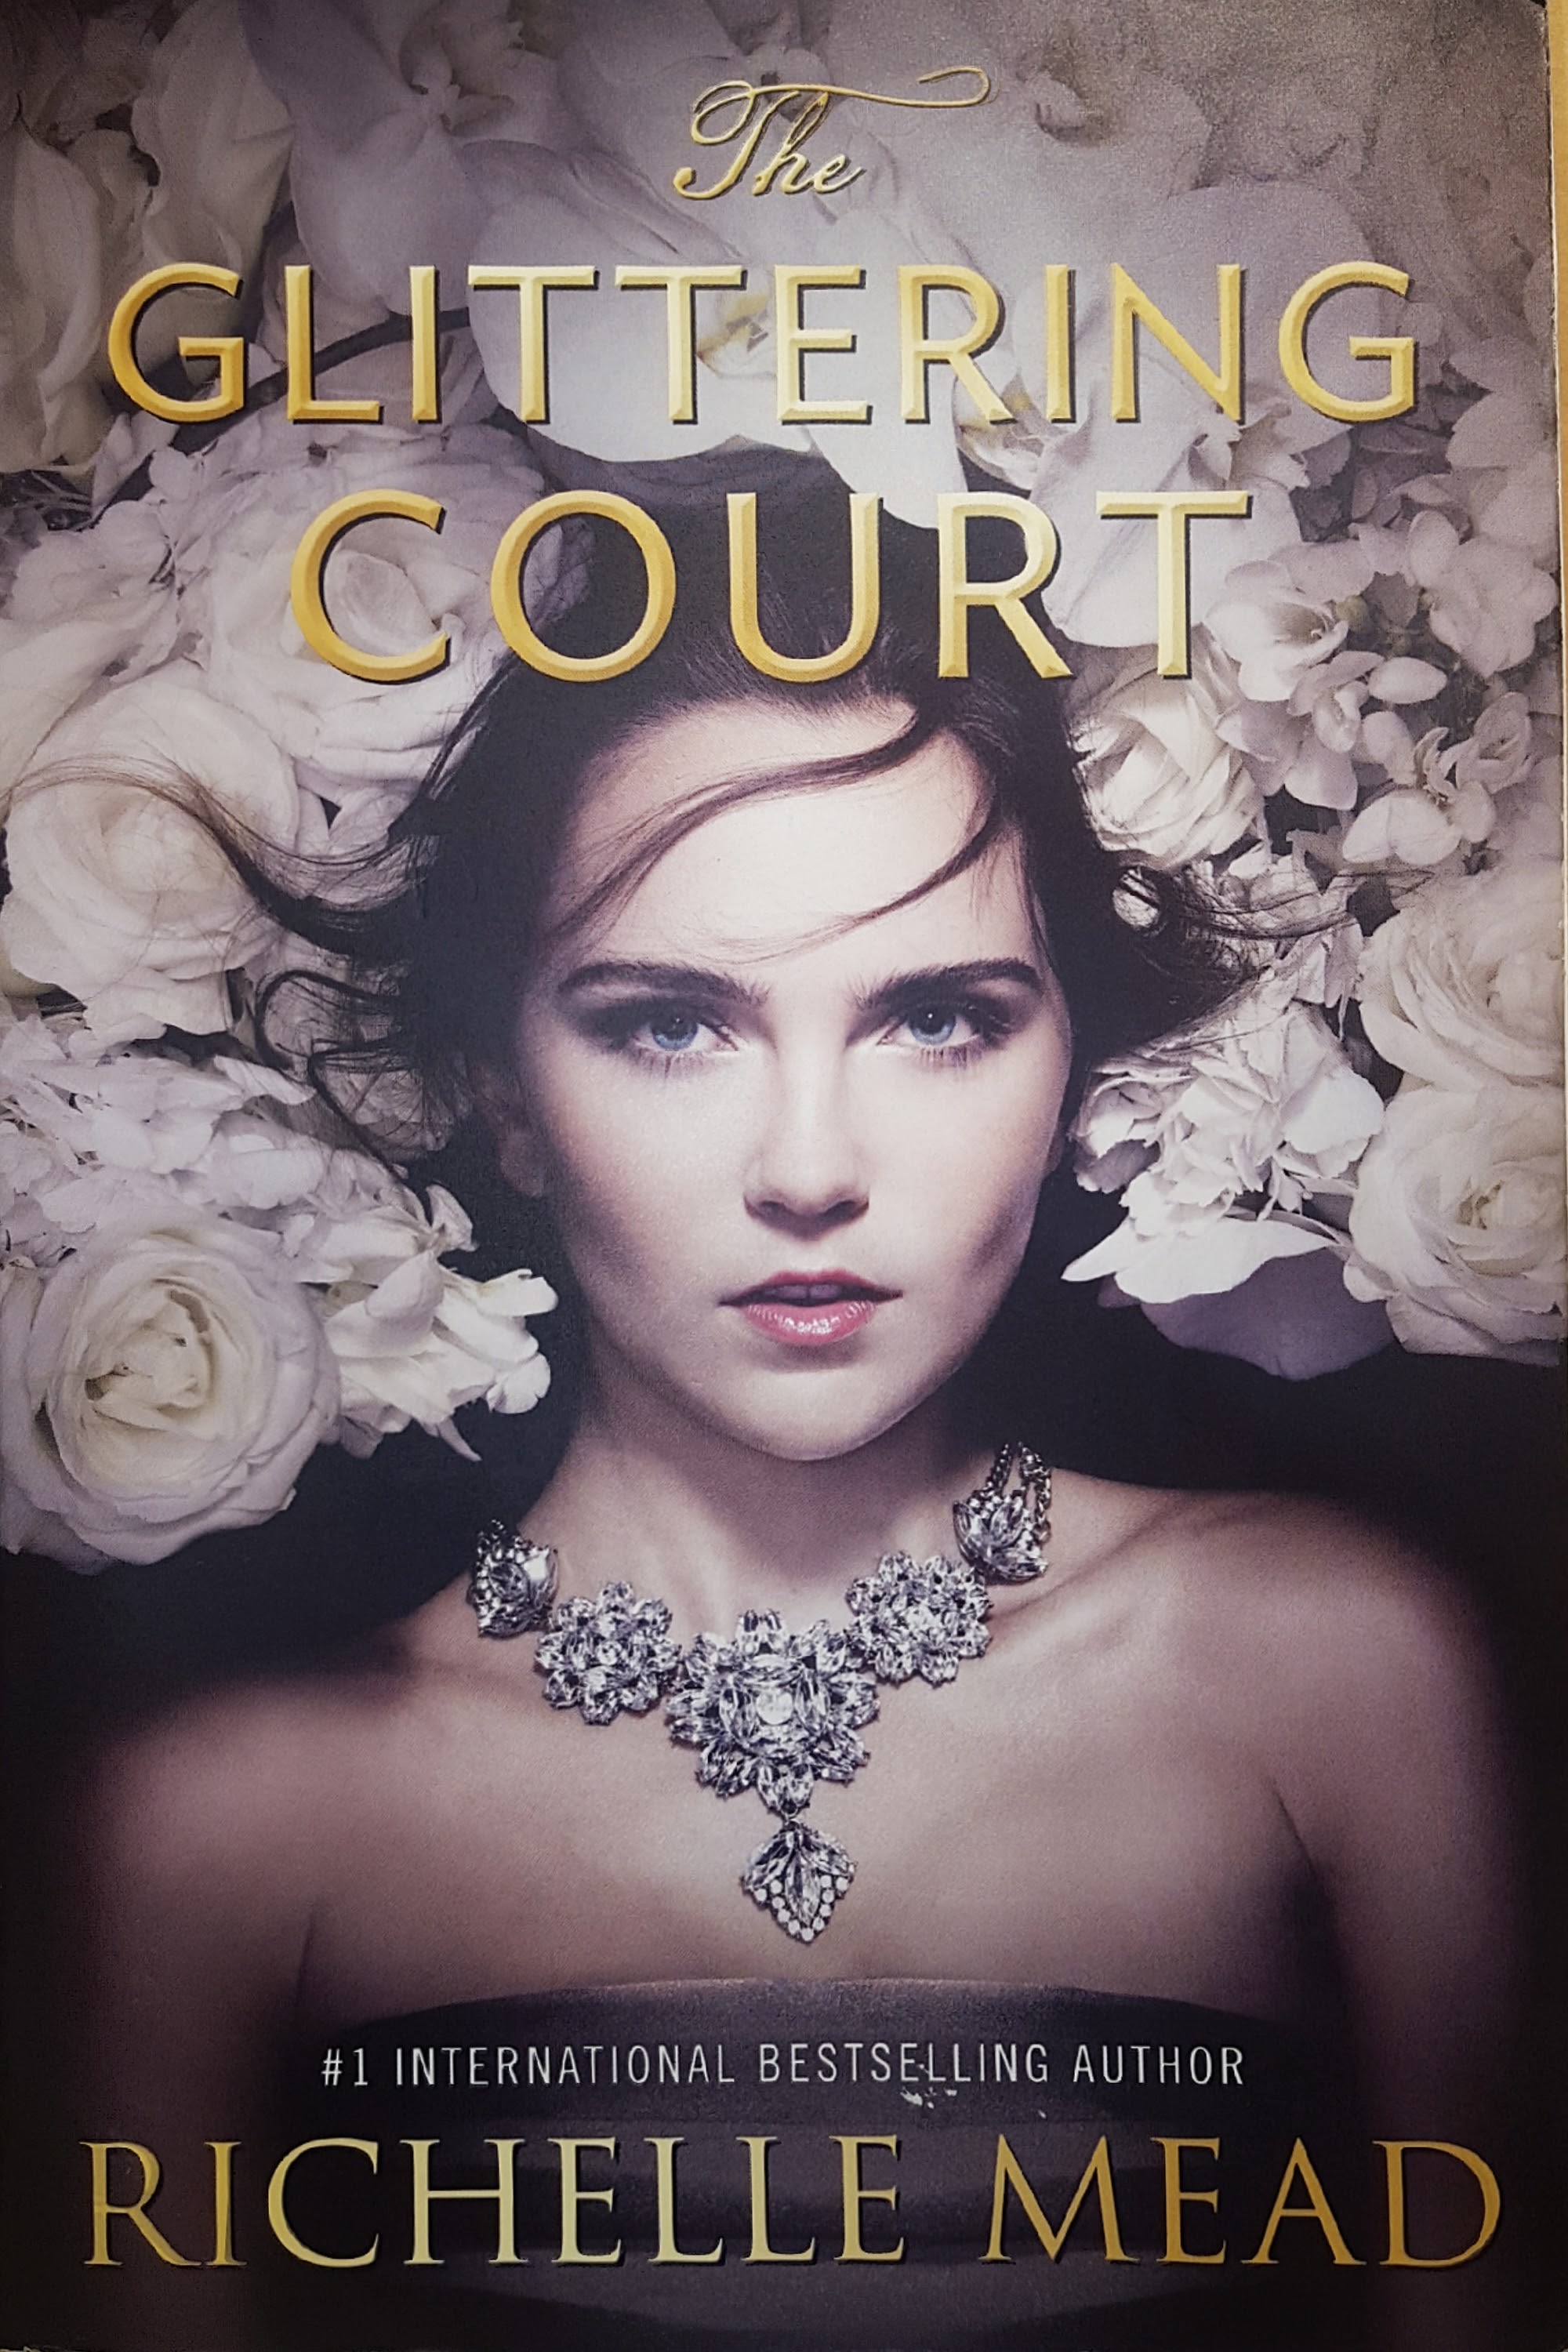 The Glittering Court - Richelle Mead